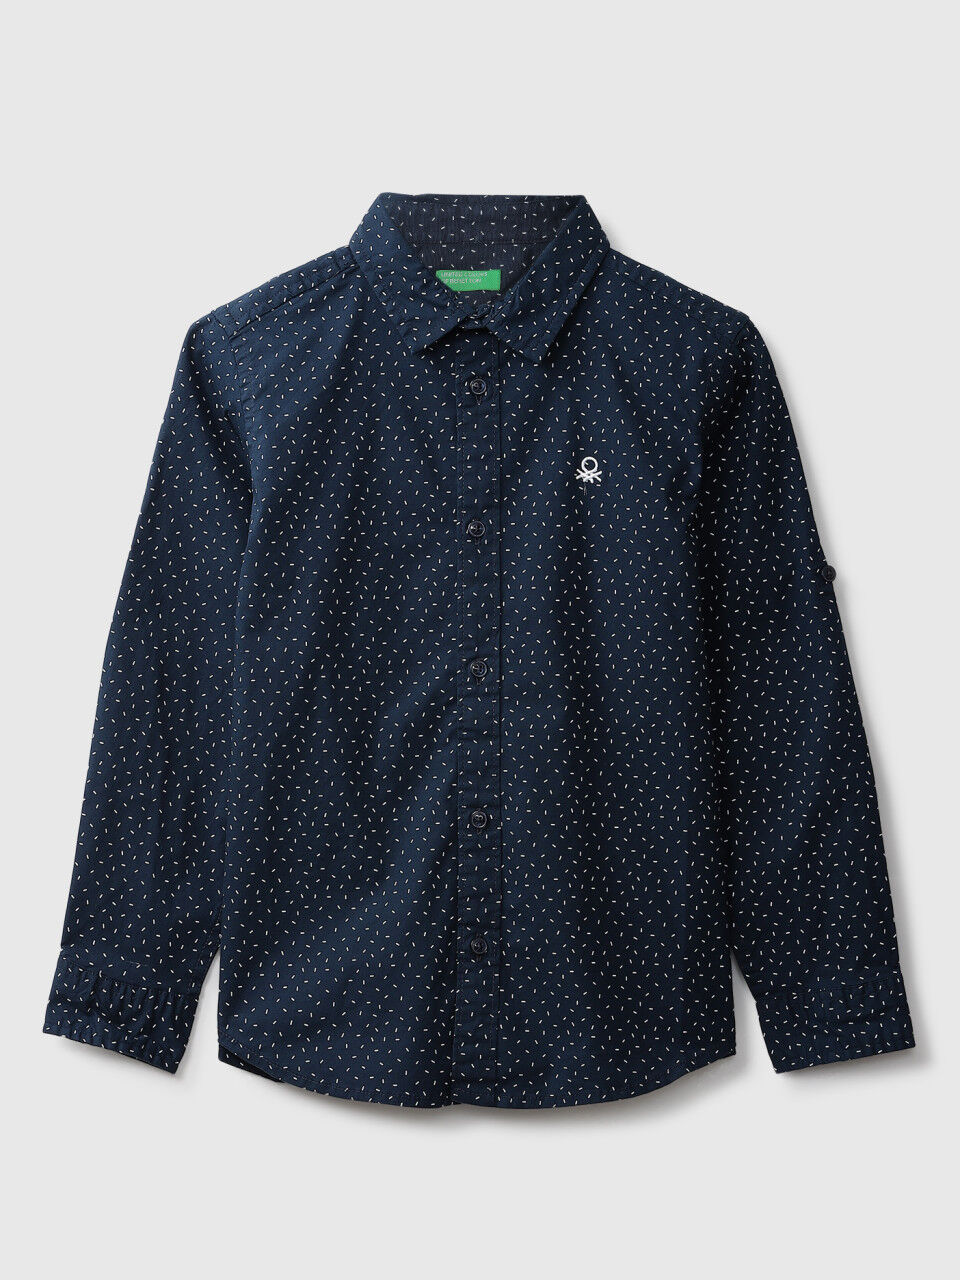 United Colors Of Benetton Navy Blue Printed Shirt